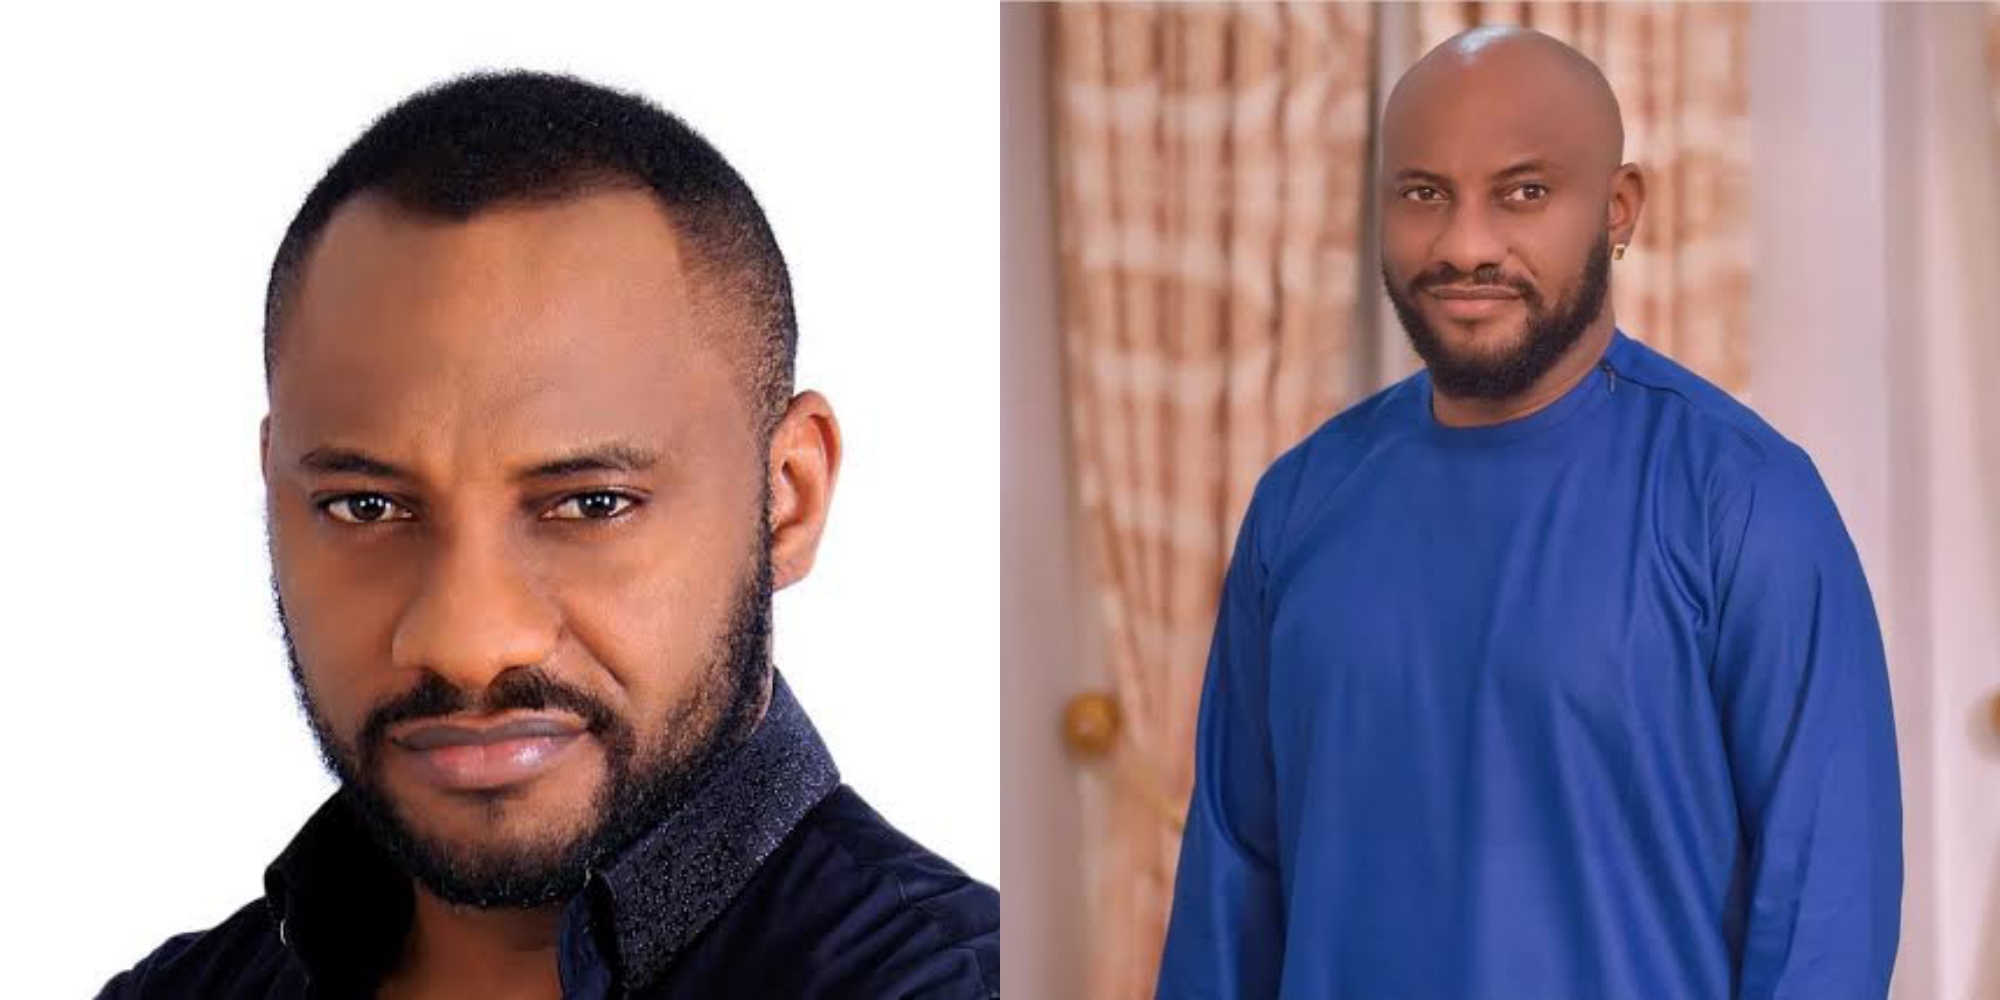 Yul Edochie Speaks On Reviving Rap Music, Set To Release Own Album